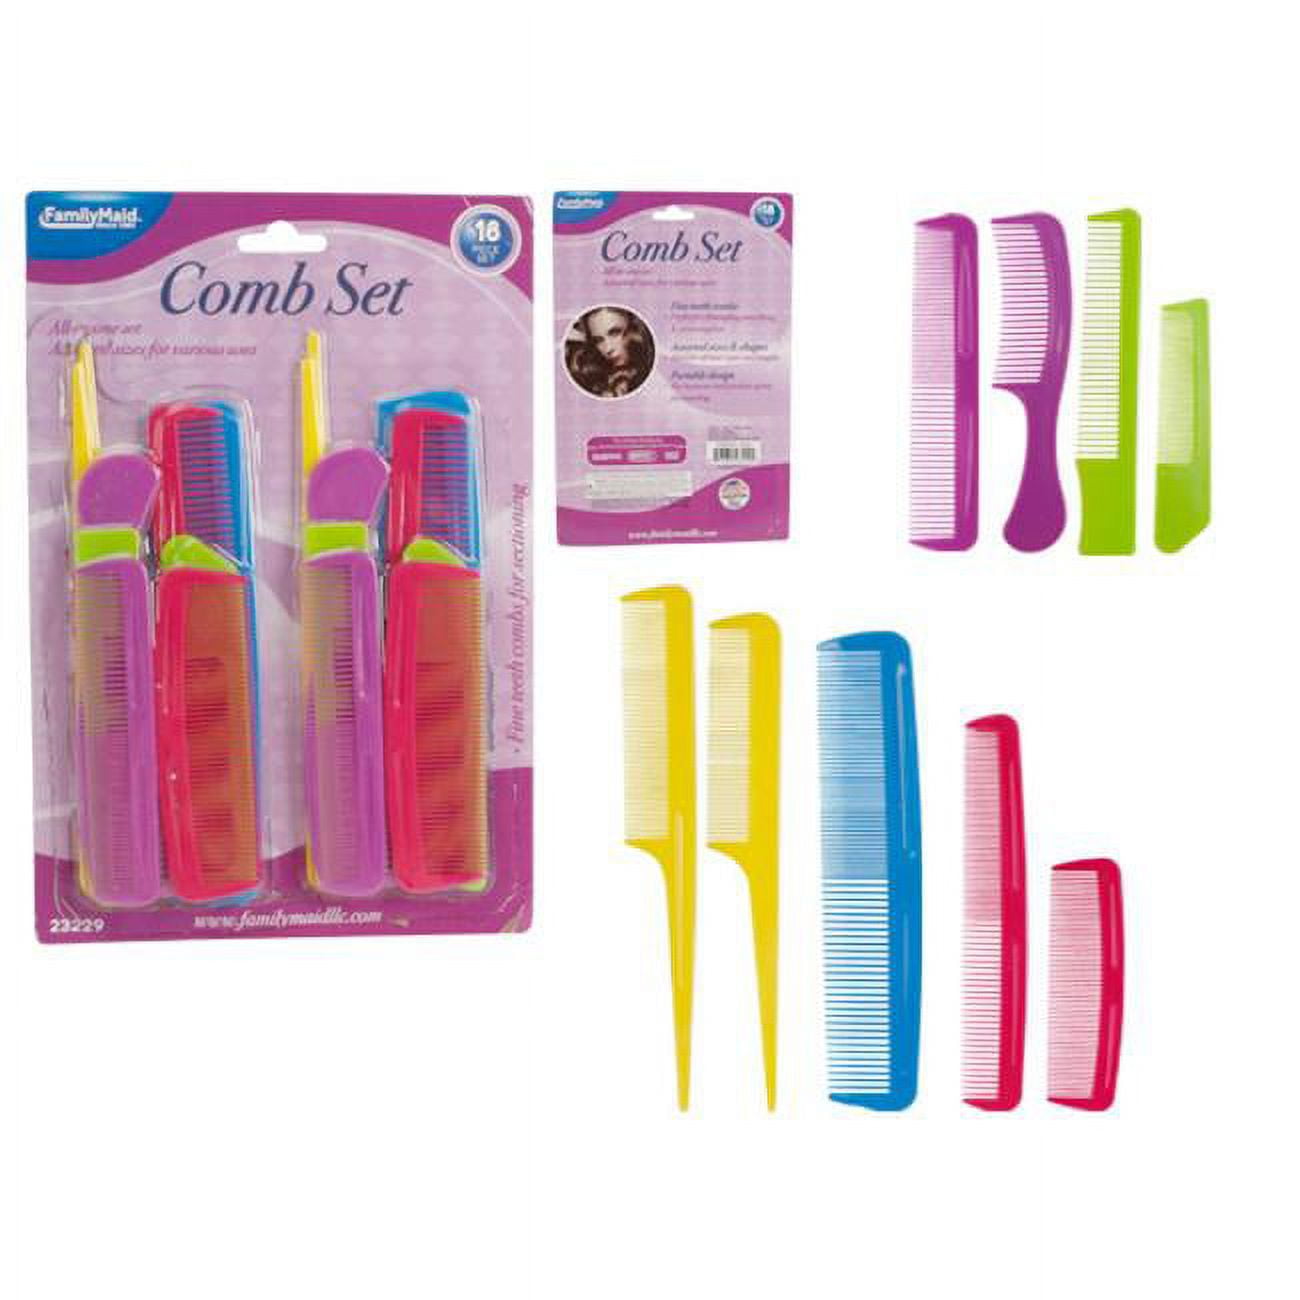 Picture of FamilyMaid 23229 Combs, Assorted Color - 18 Piece